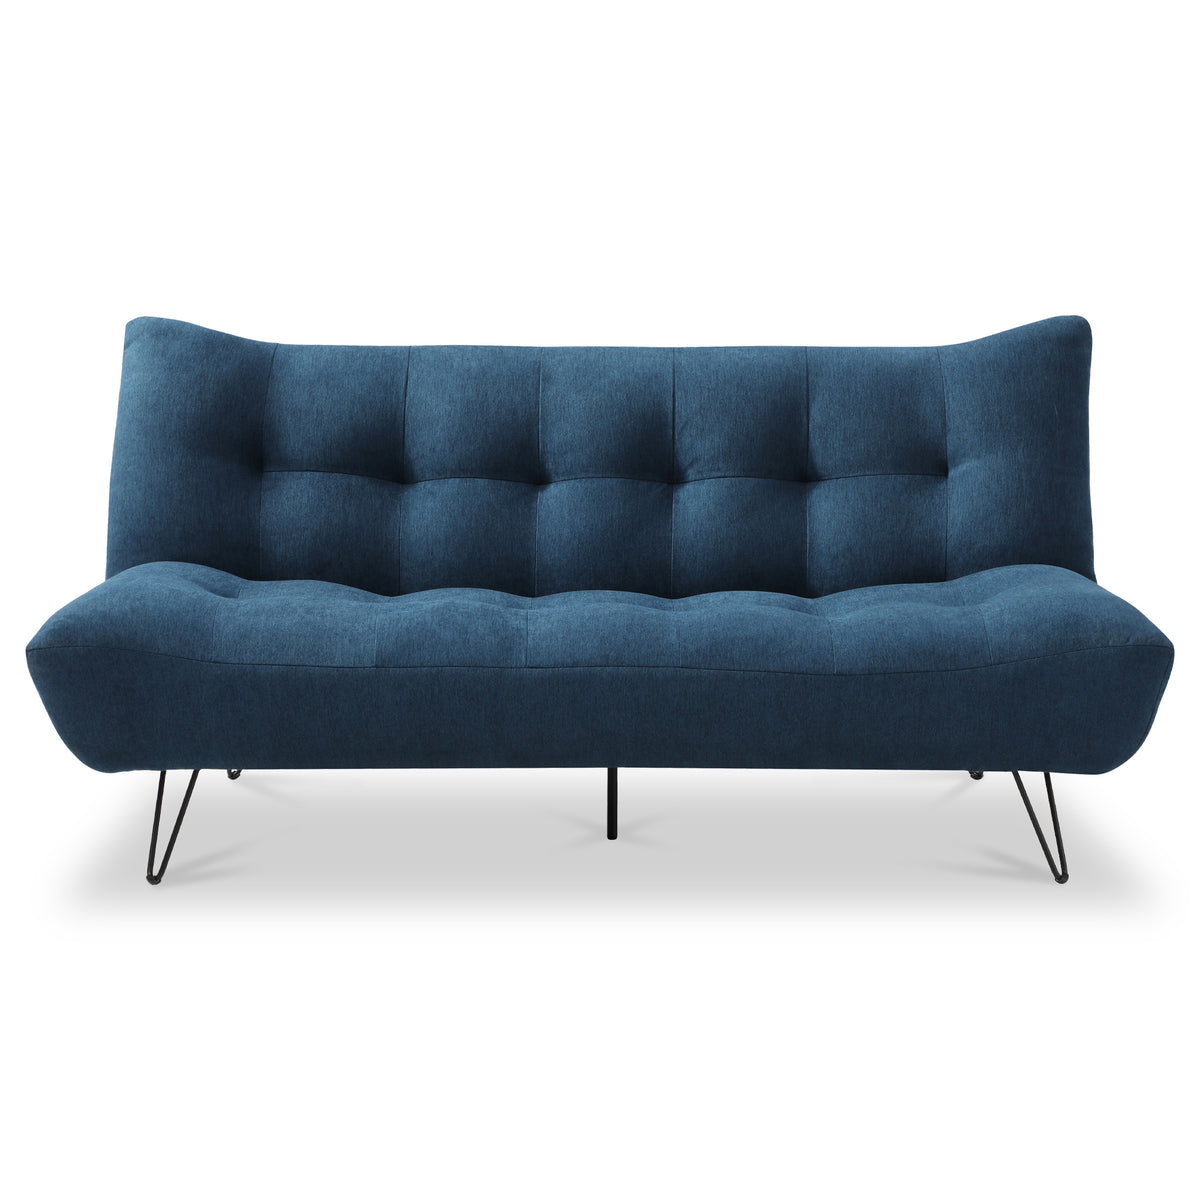 Pandora Blue Click Clack Sofabed from Roseland Furniture